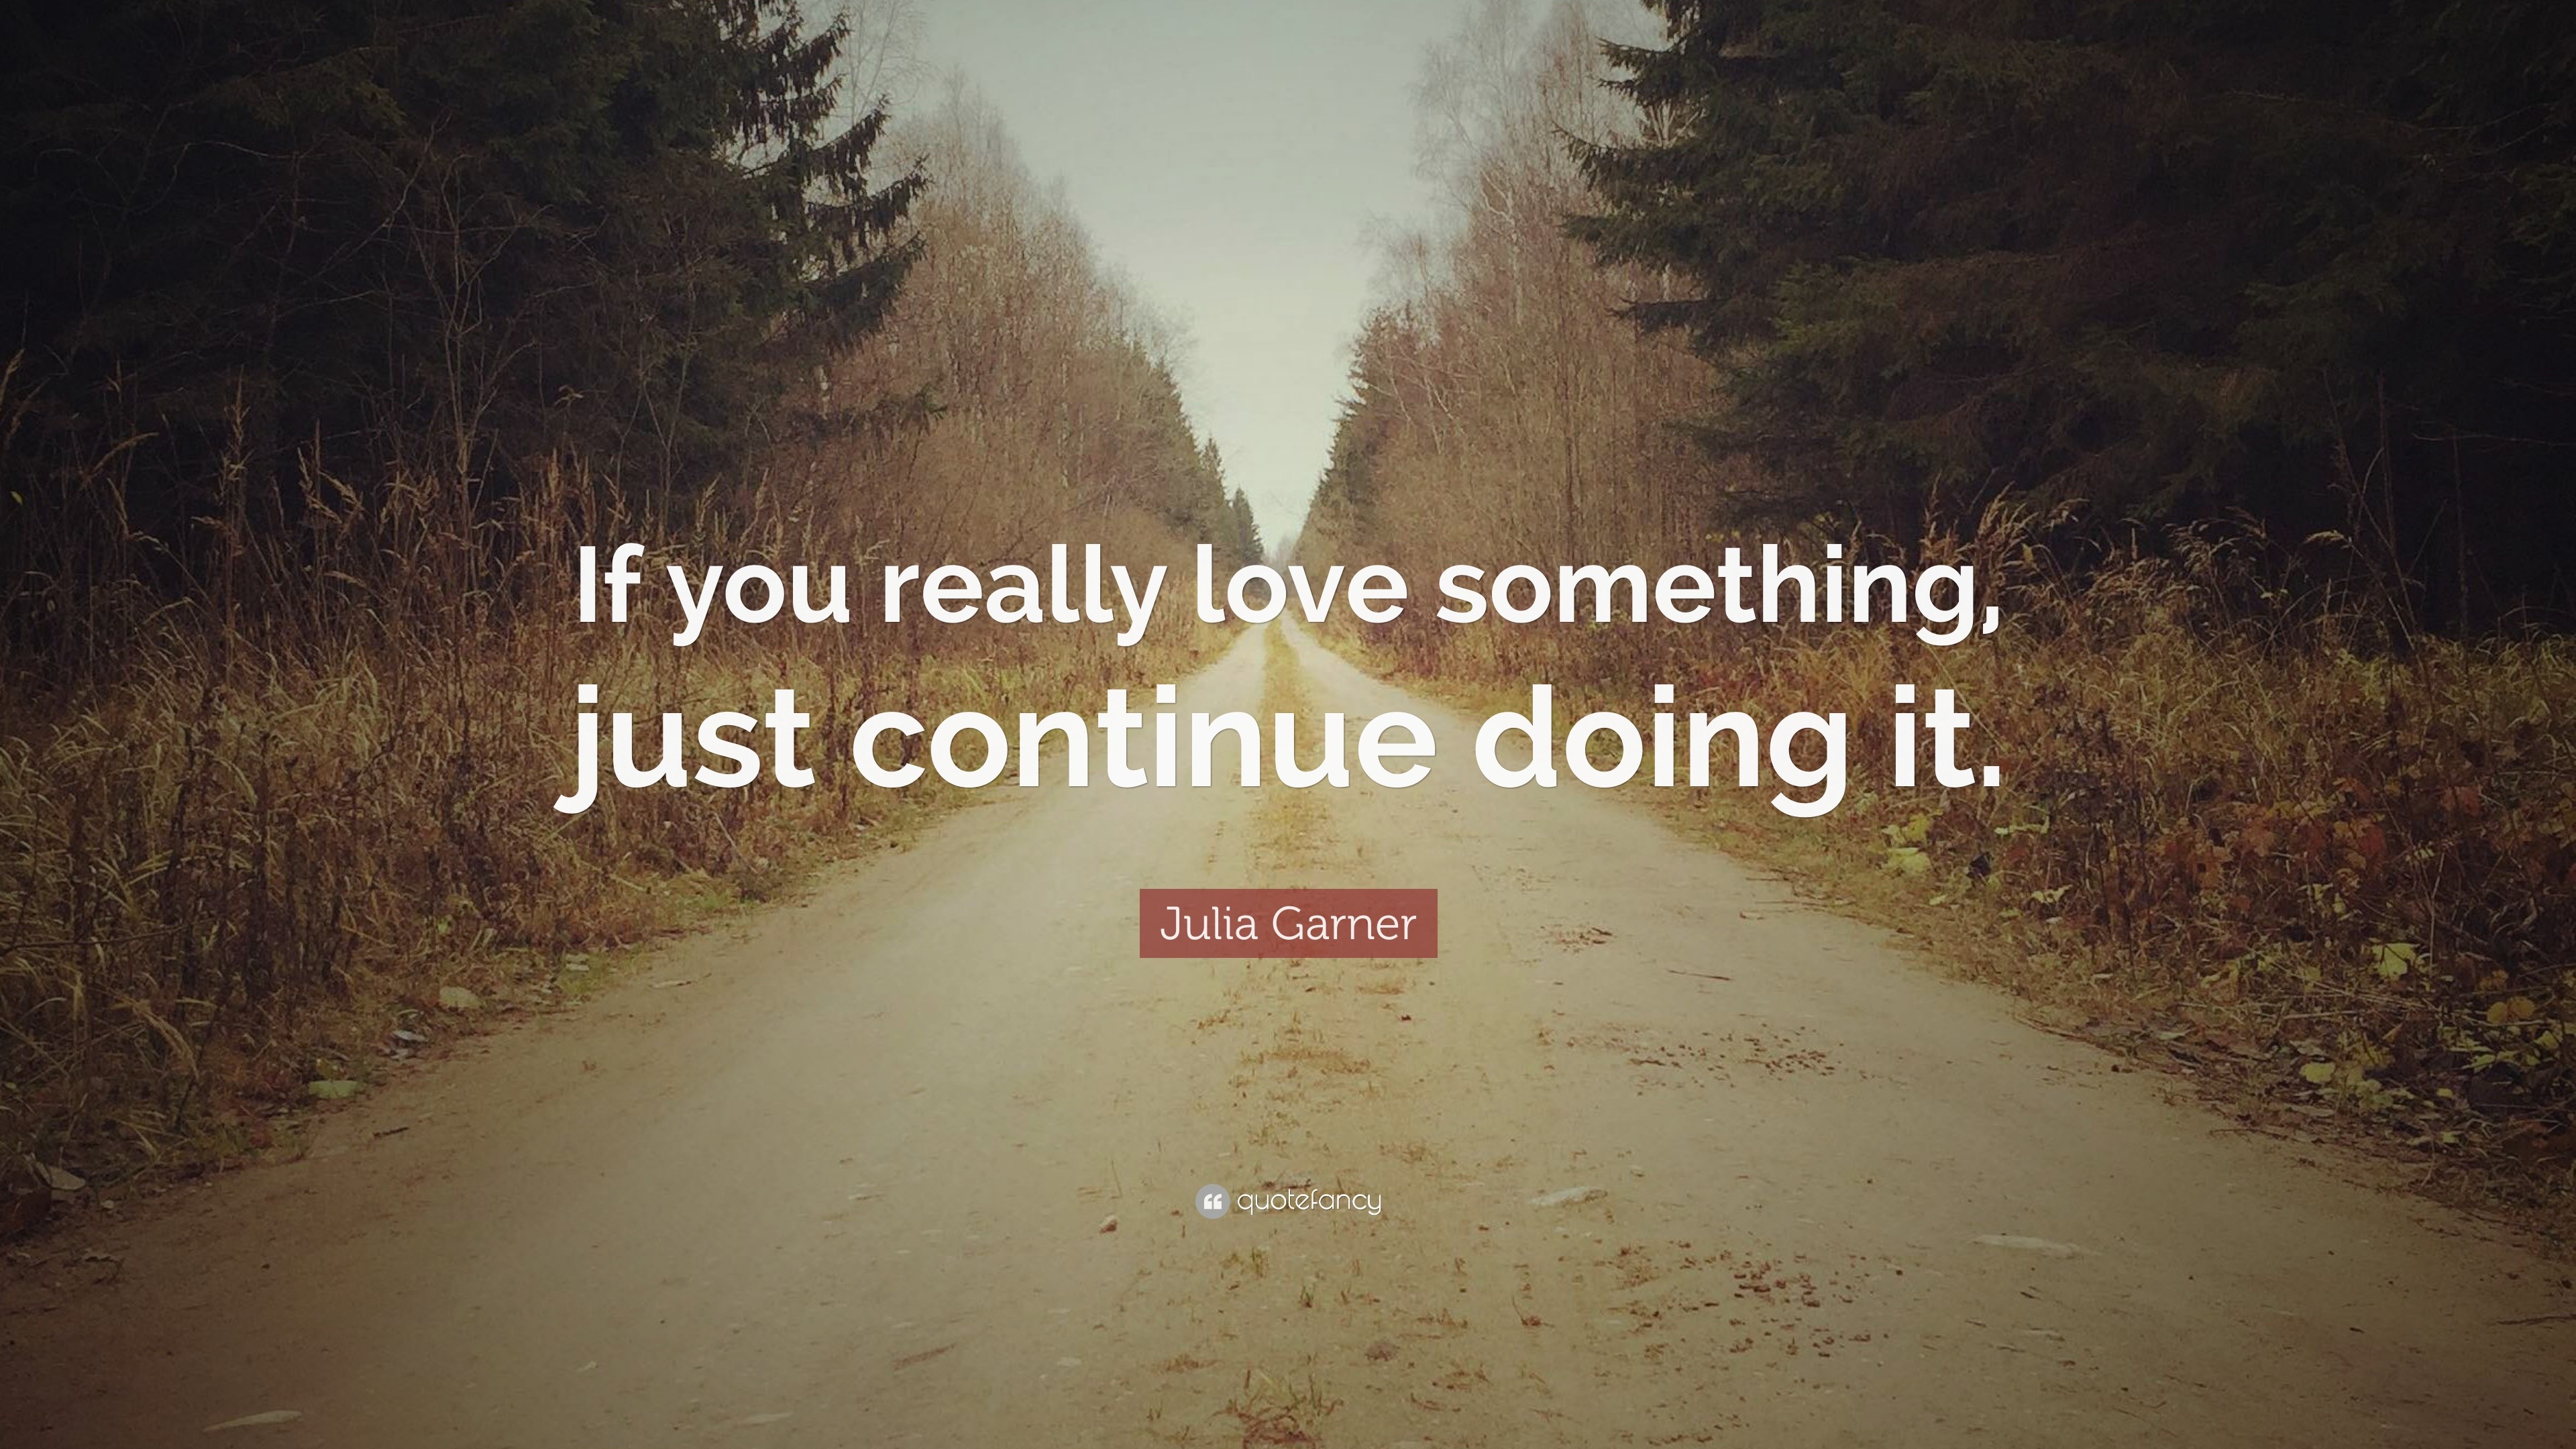 Julia Garner Quote: “If you really love something, just continue doing it.”